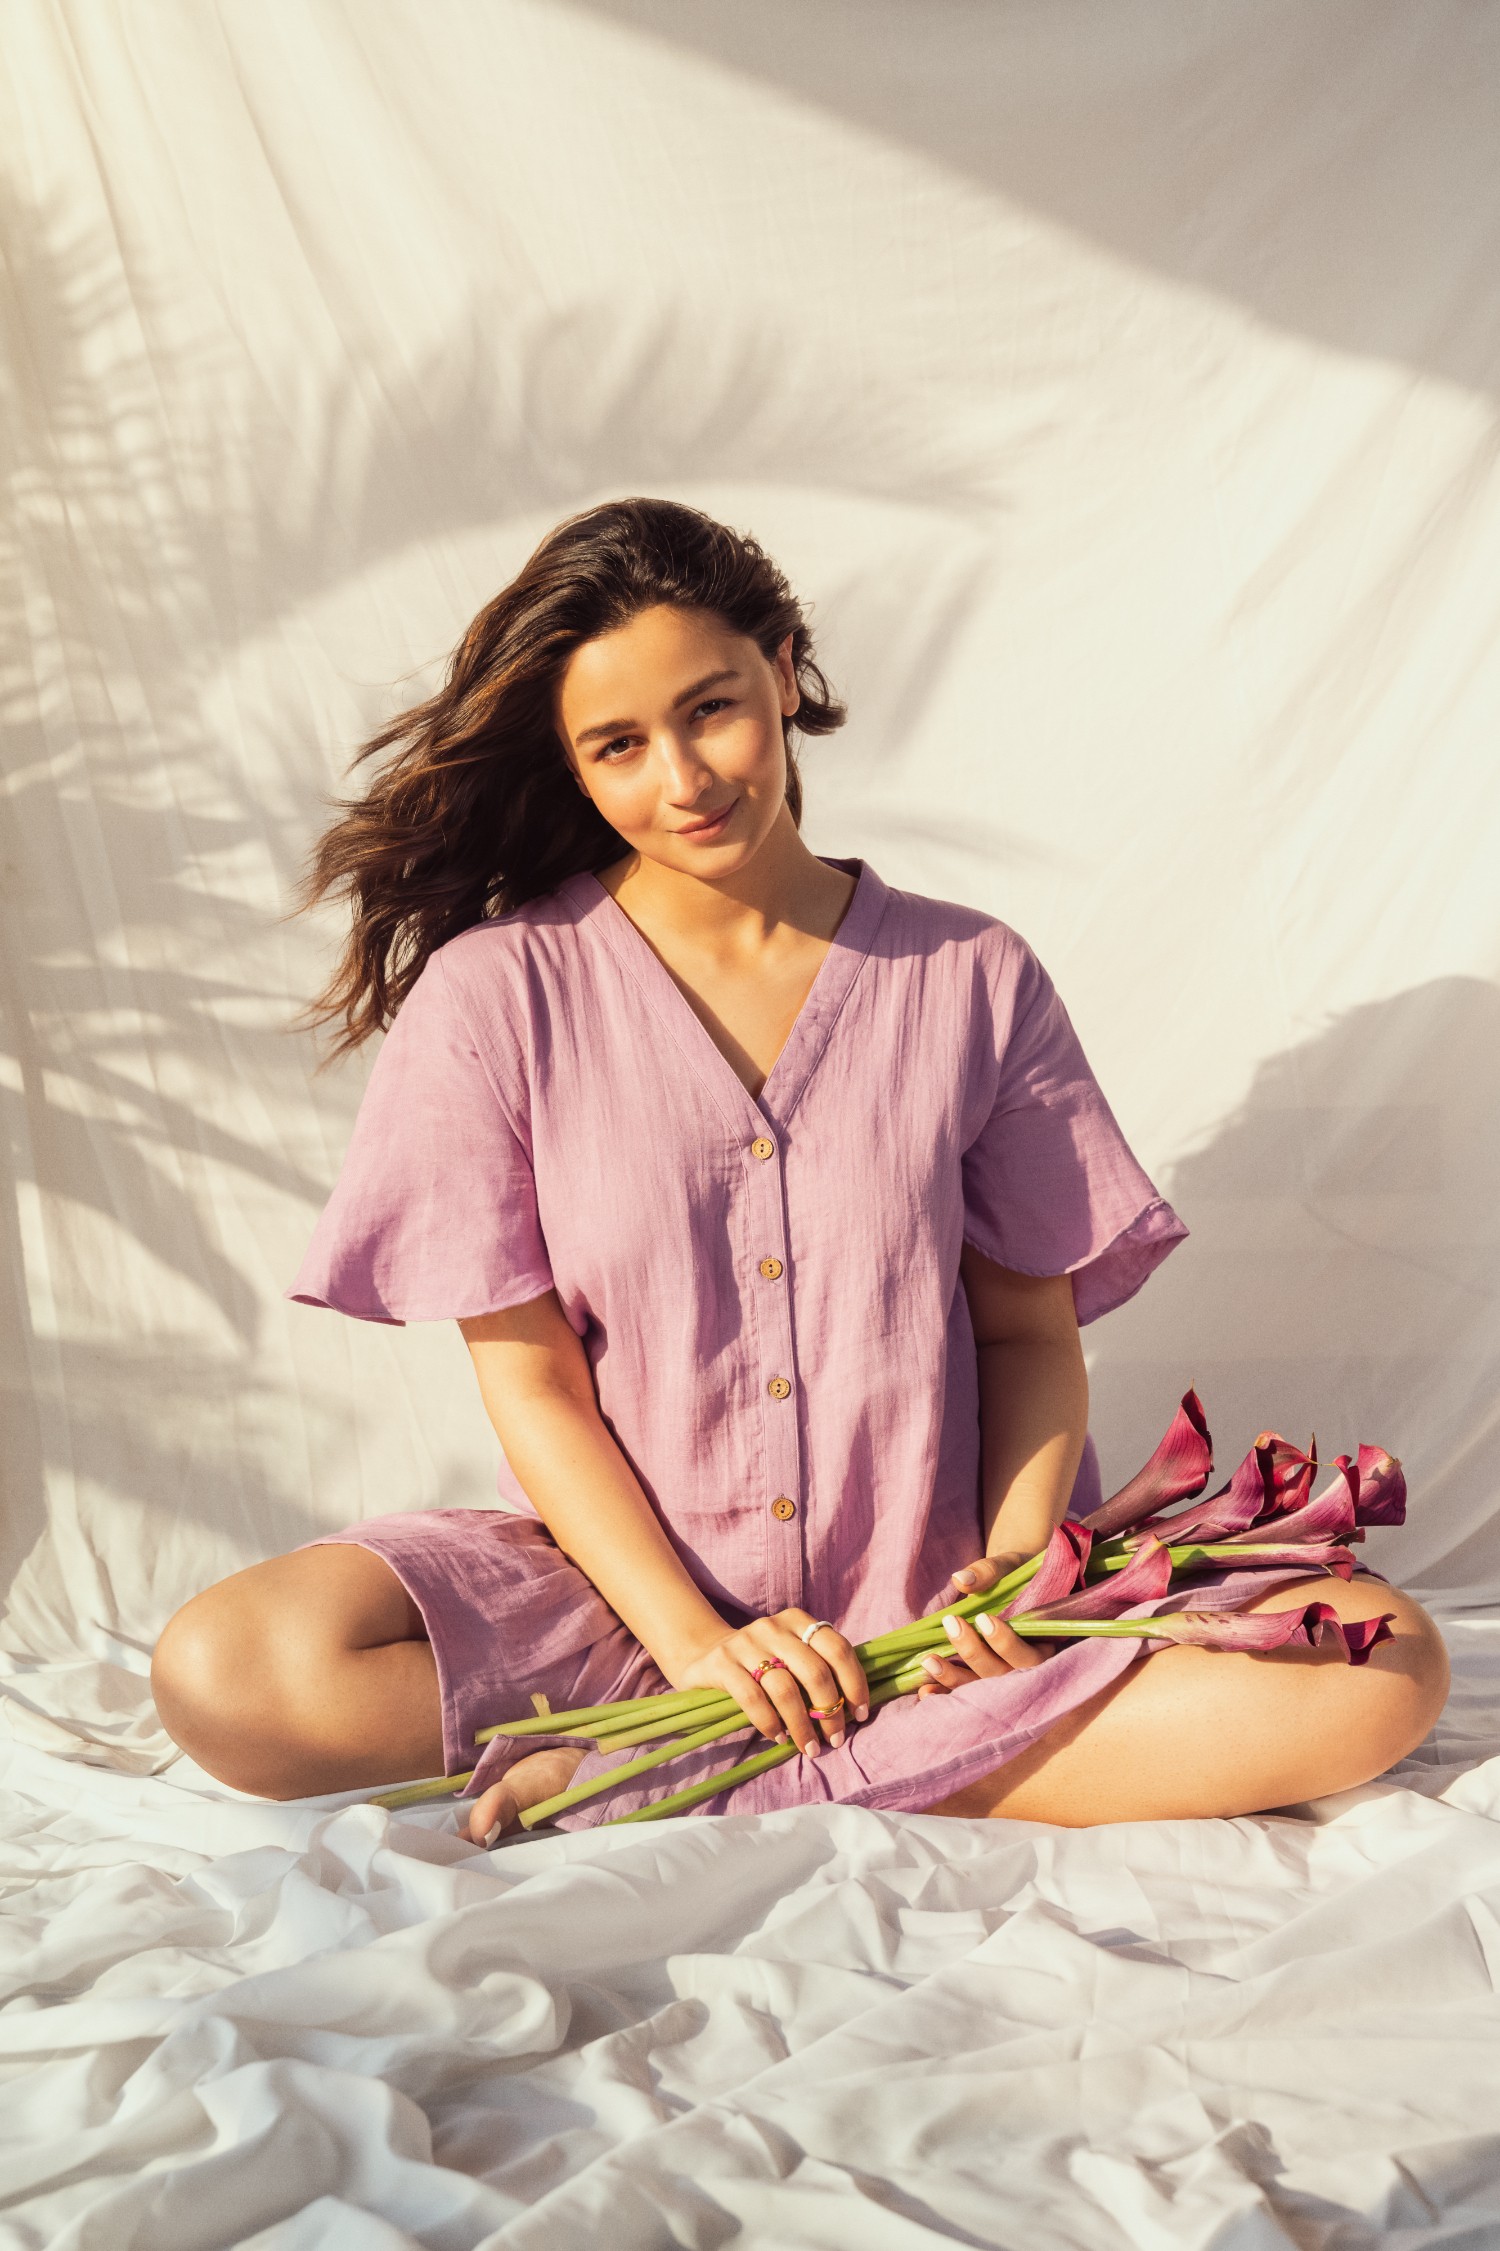 Alia Bhatt Xvideo - Why Love Dictates Life For Bollywood's Finest Young Superstar